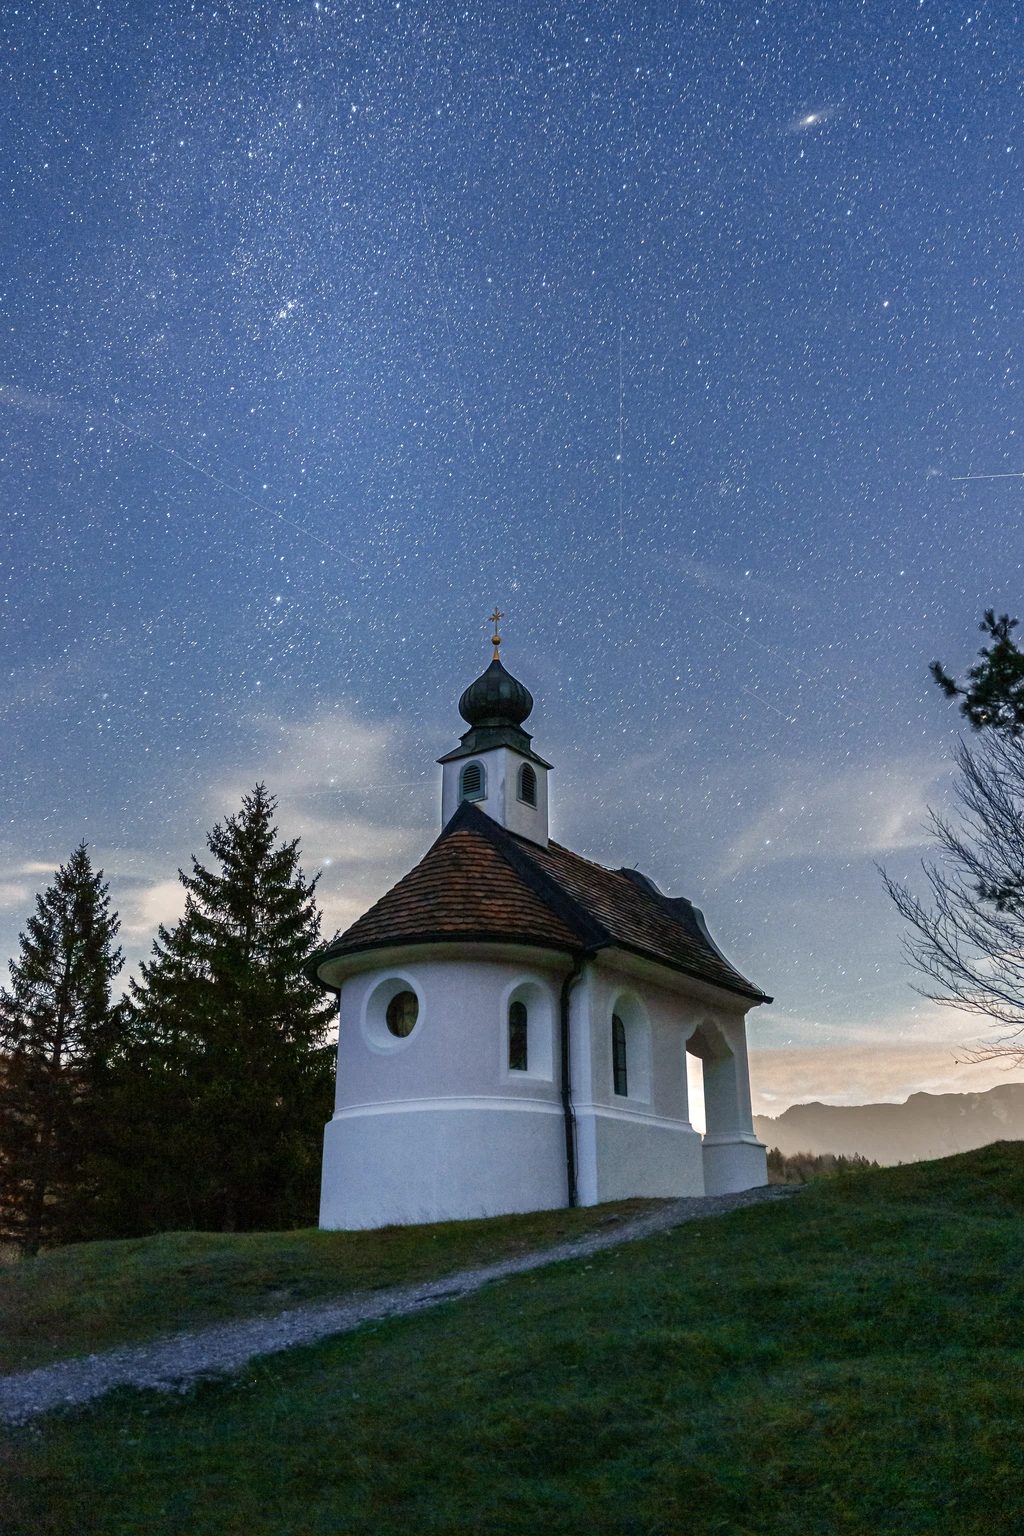 Stars rise over the Church